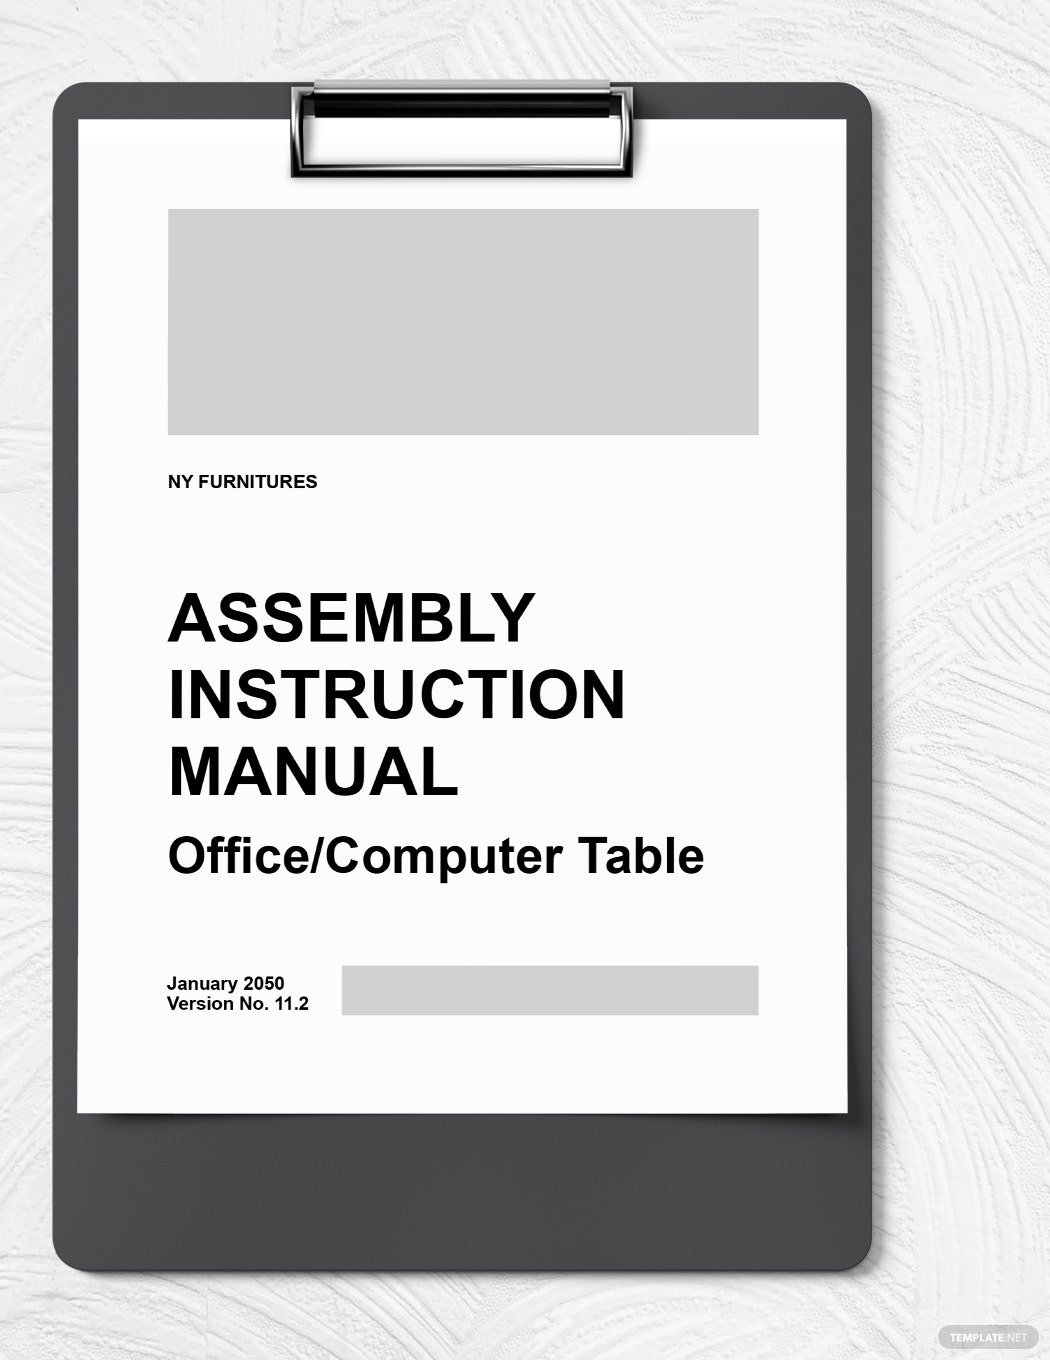 assembly-instruction-manual-ideas-and-examples